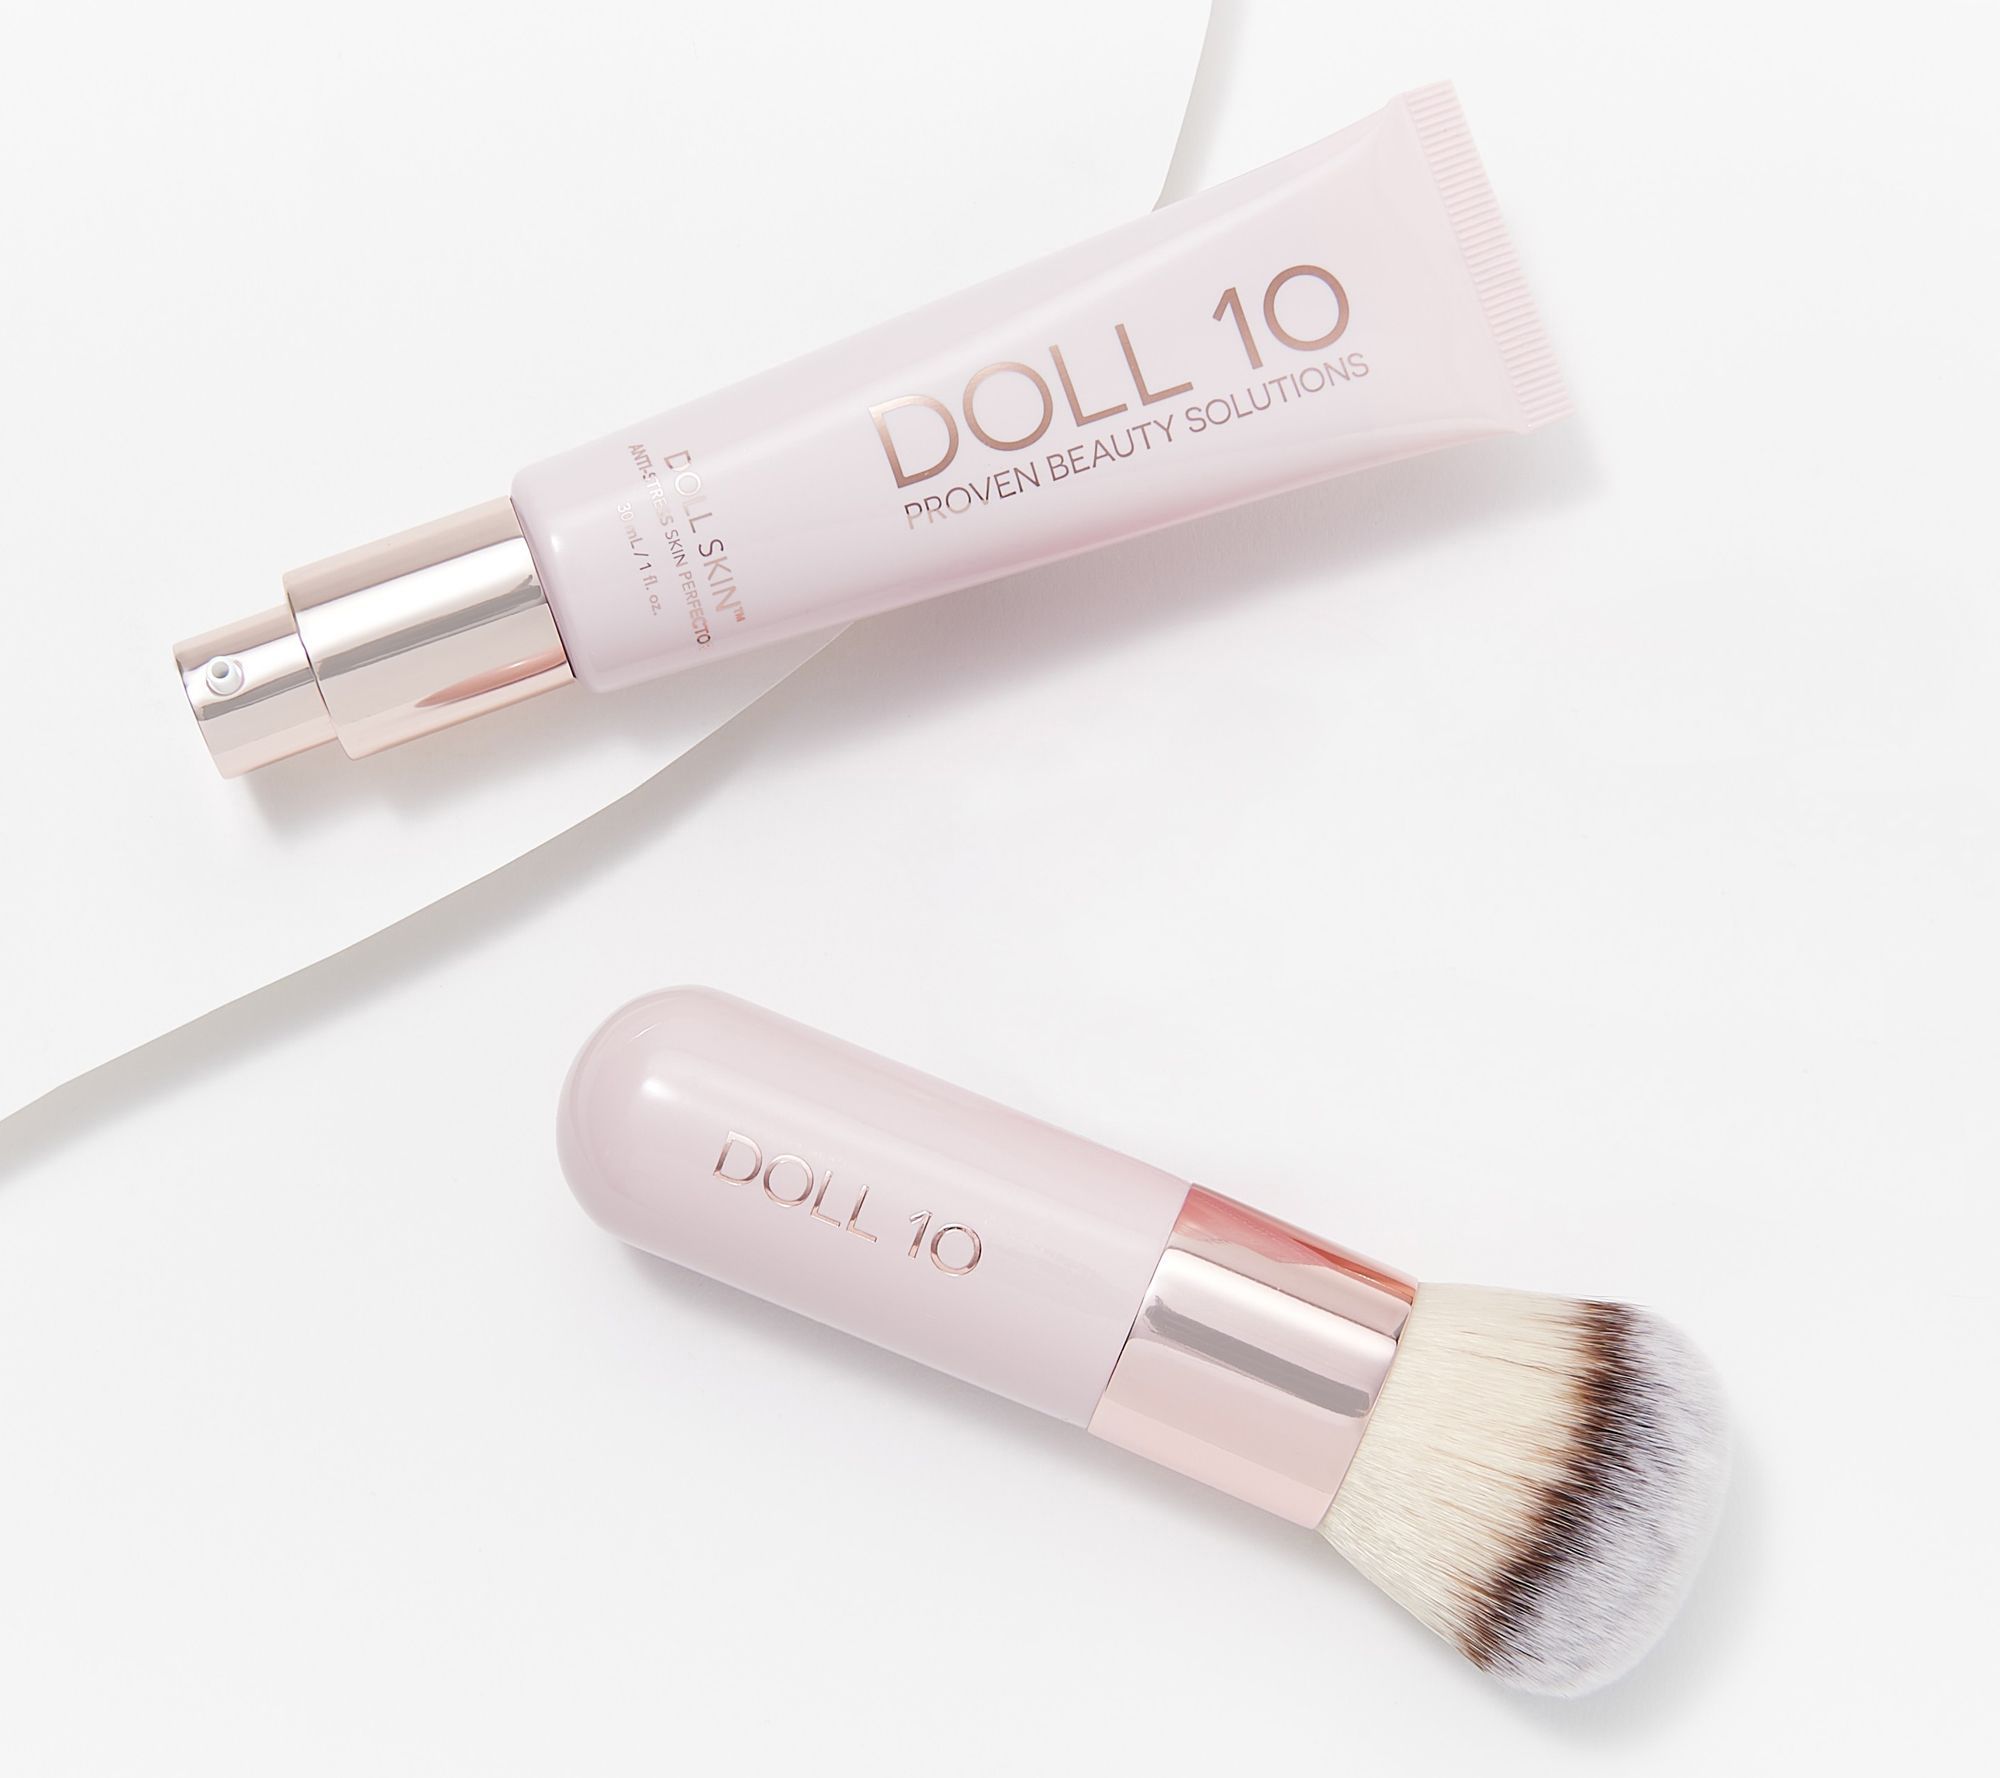 Imidlertid bule studieafgift Doll 10 — Makeup Brushes, Foundation & More - QVC.com